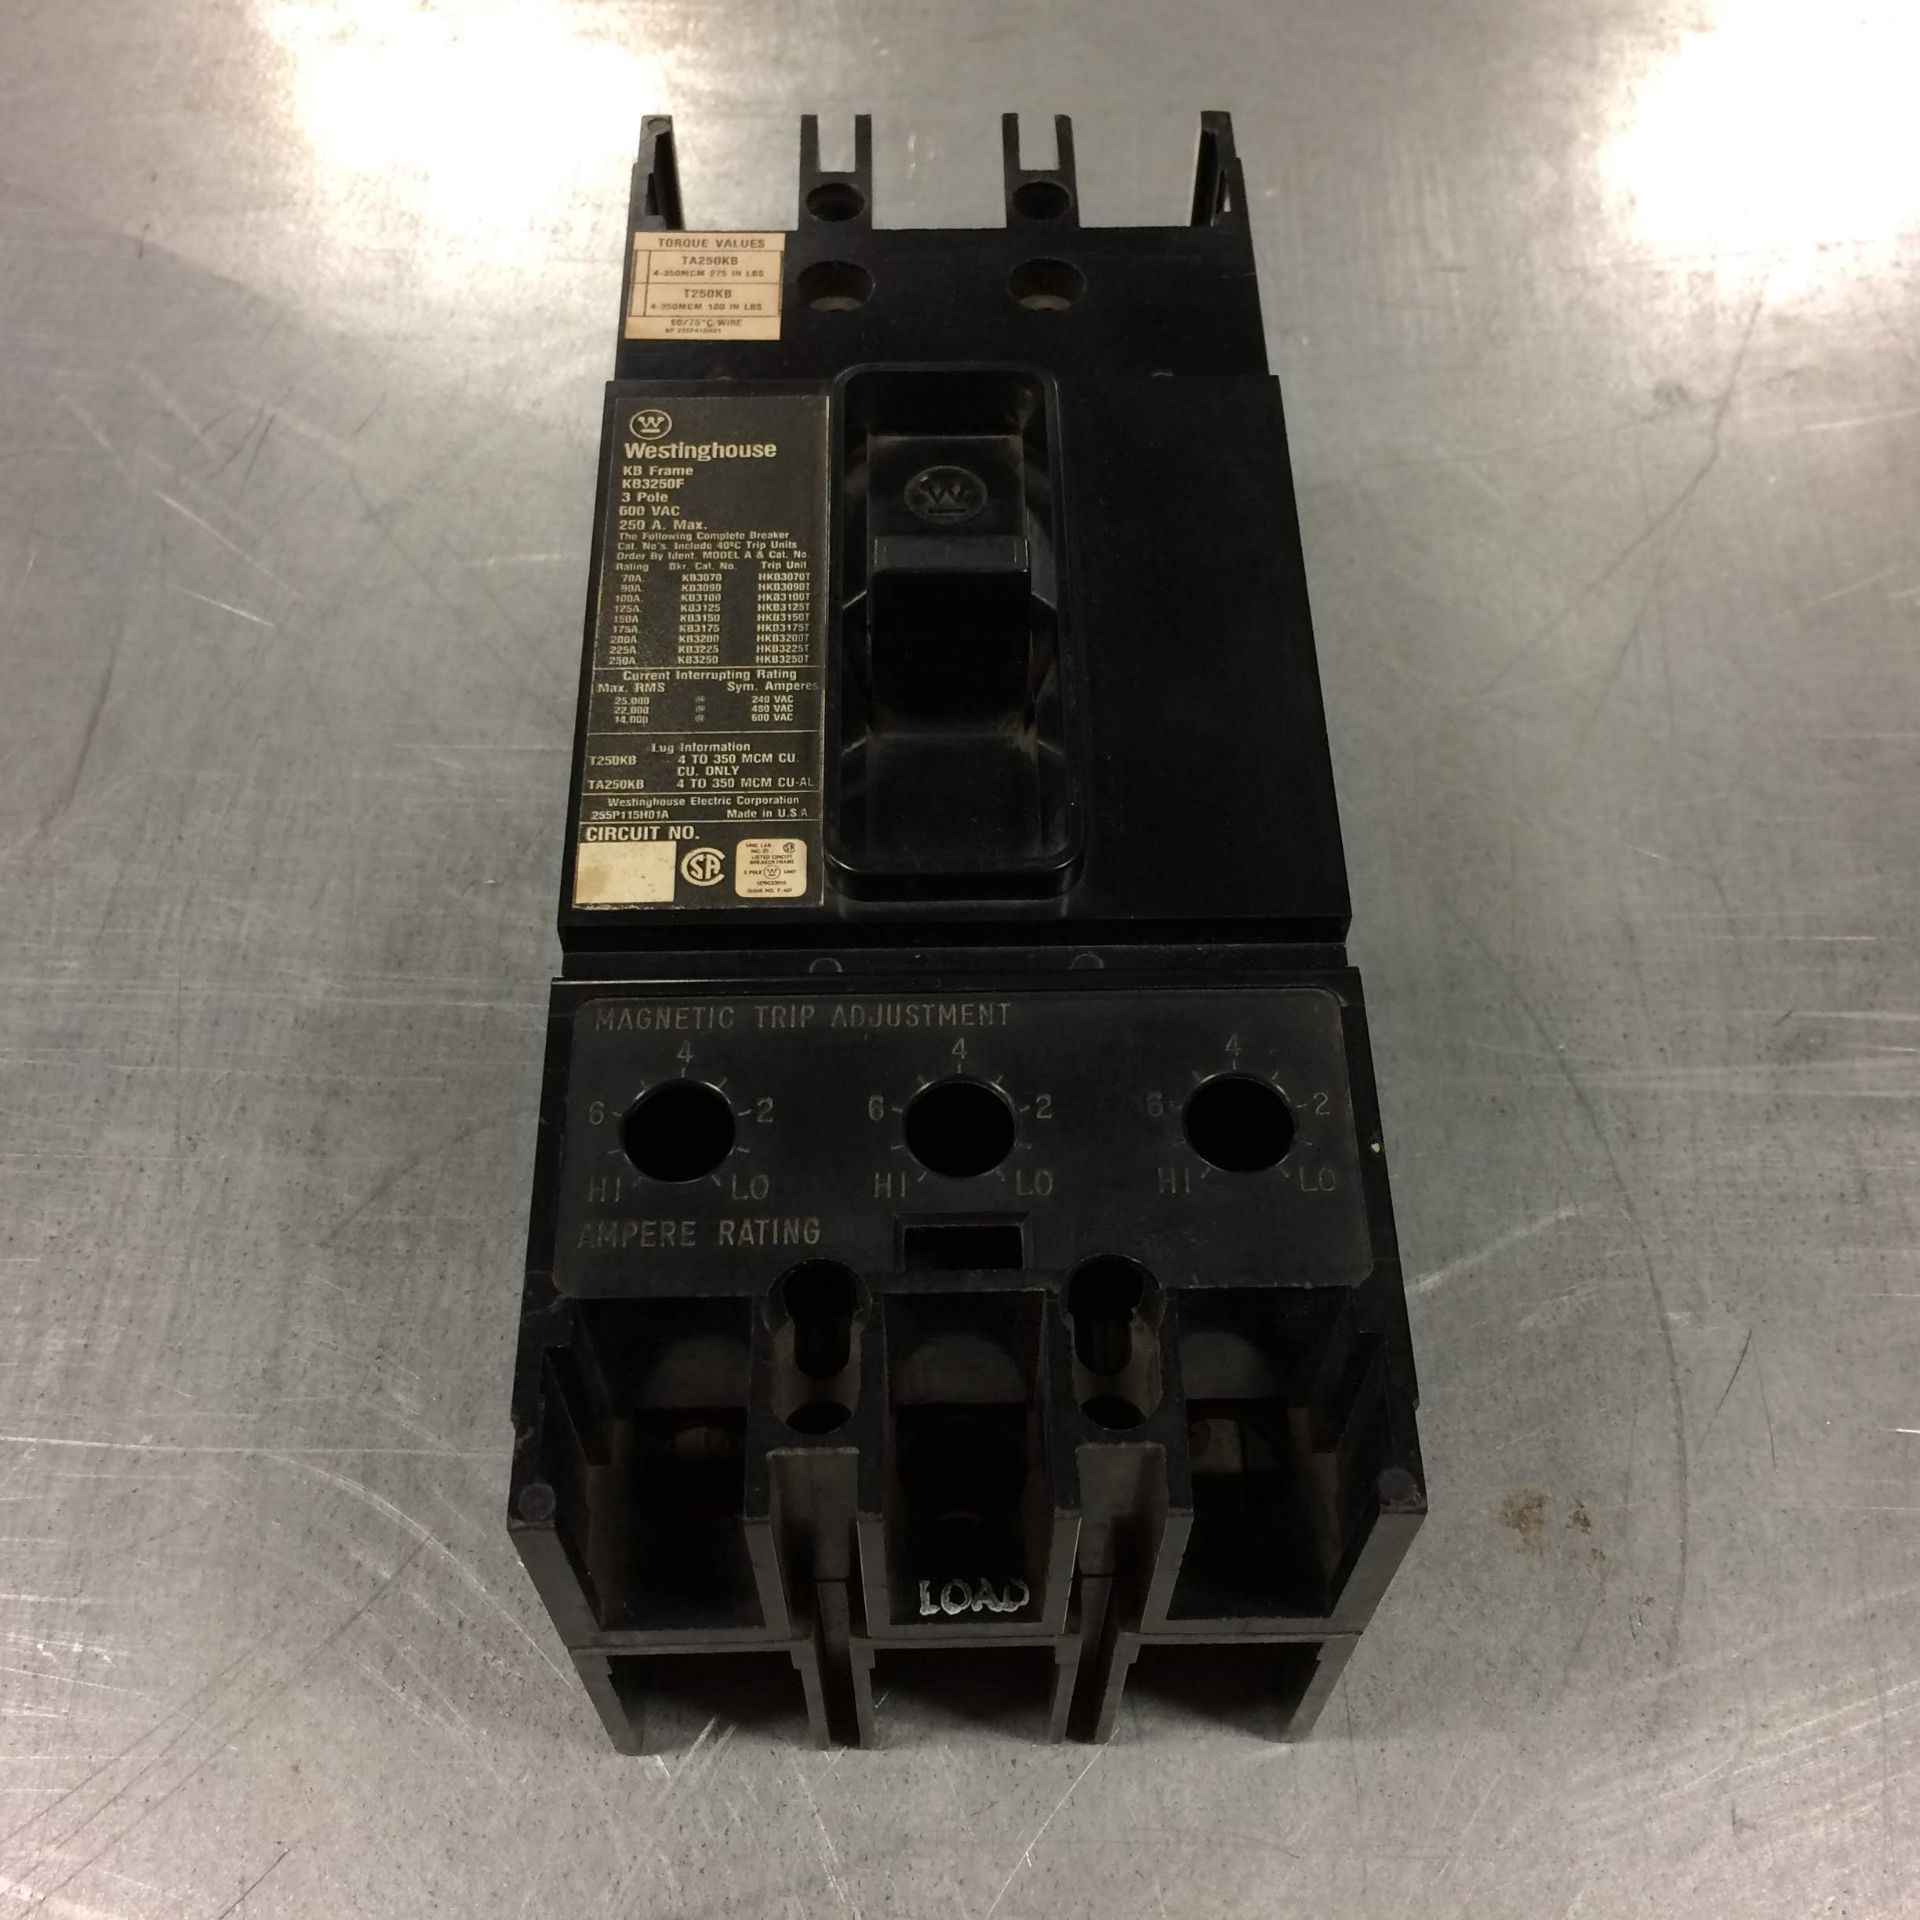 (1) KB3250F WESTINGHOUSE BREAKER USED. Pickup your lot(s) for free! Shipping is available for all